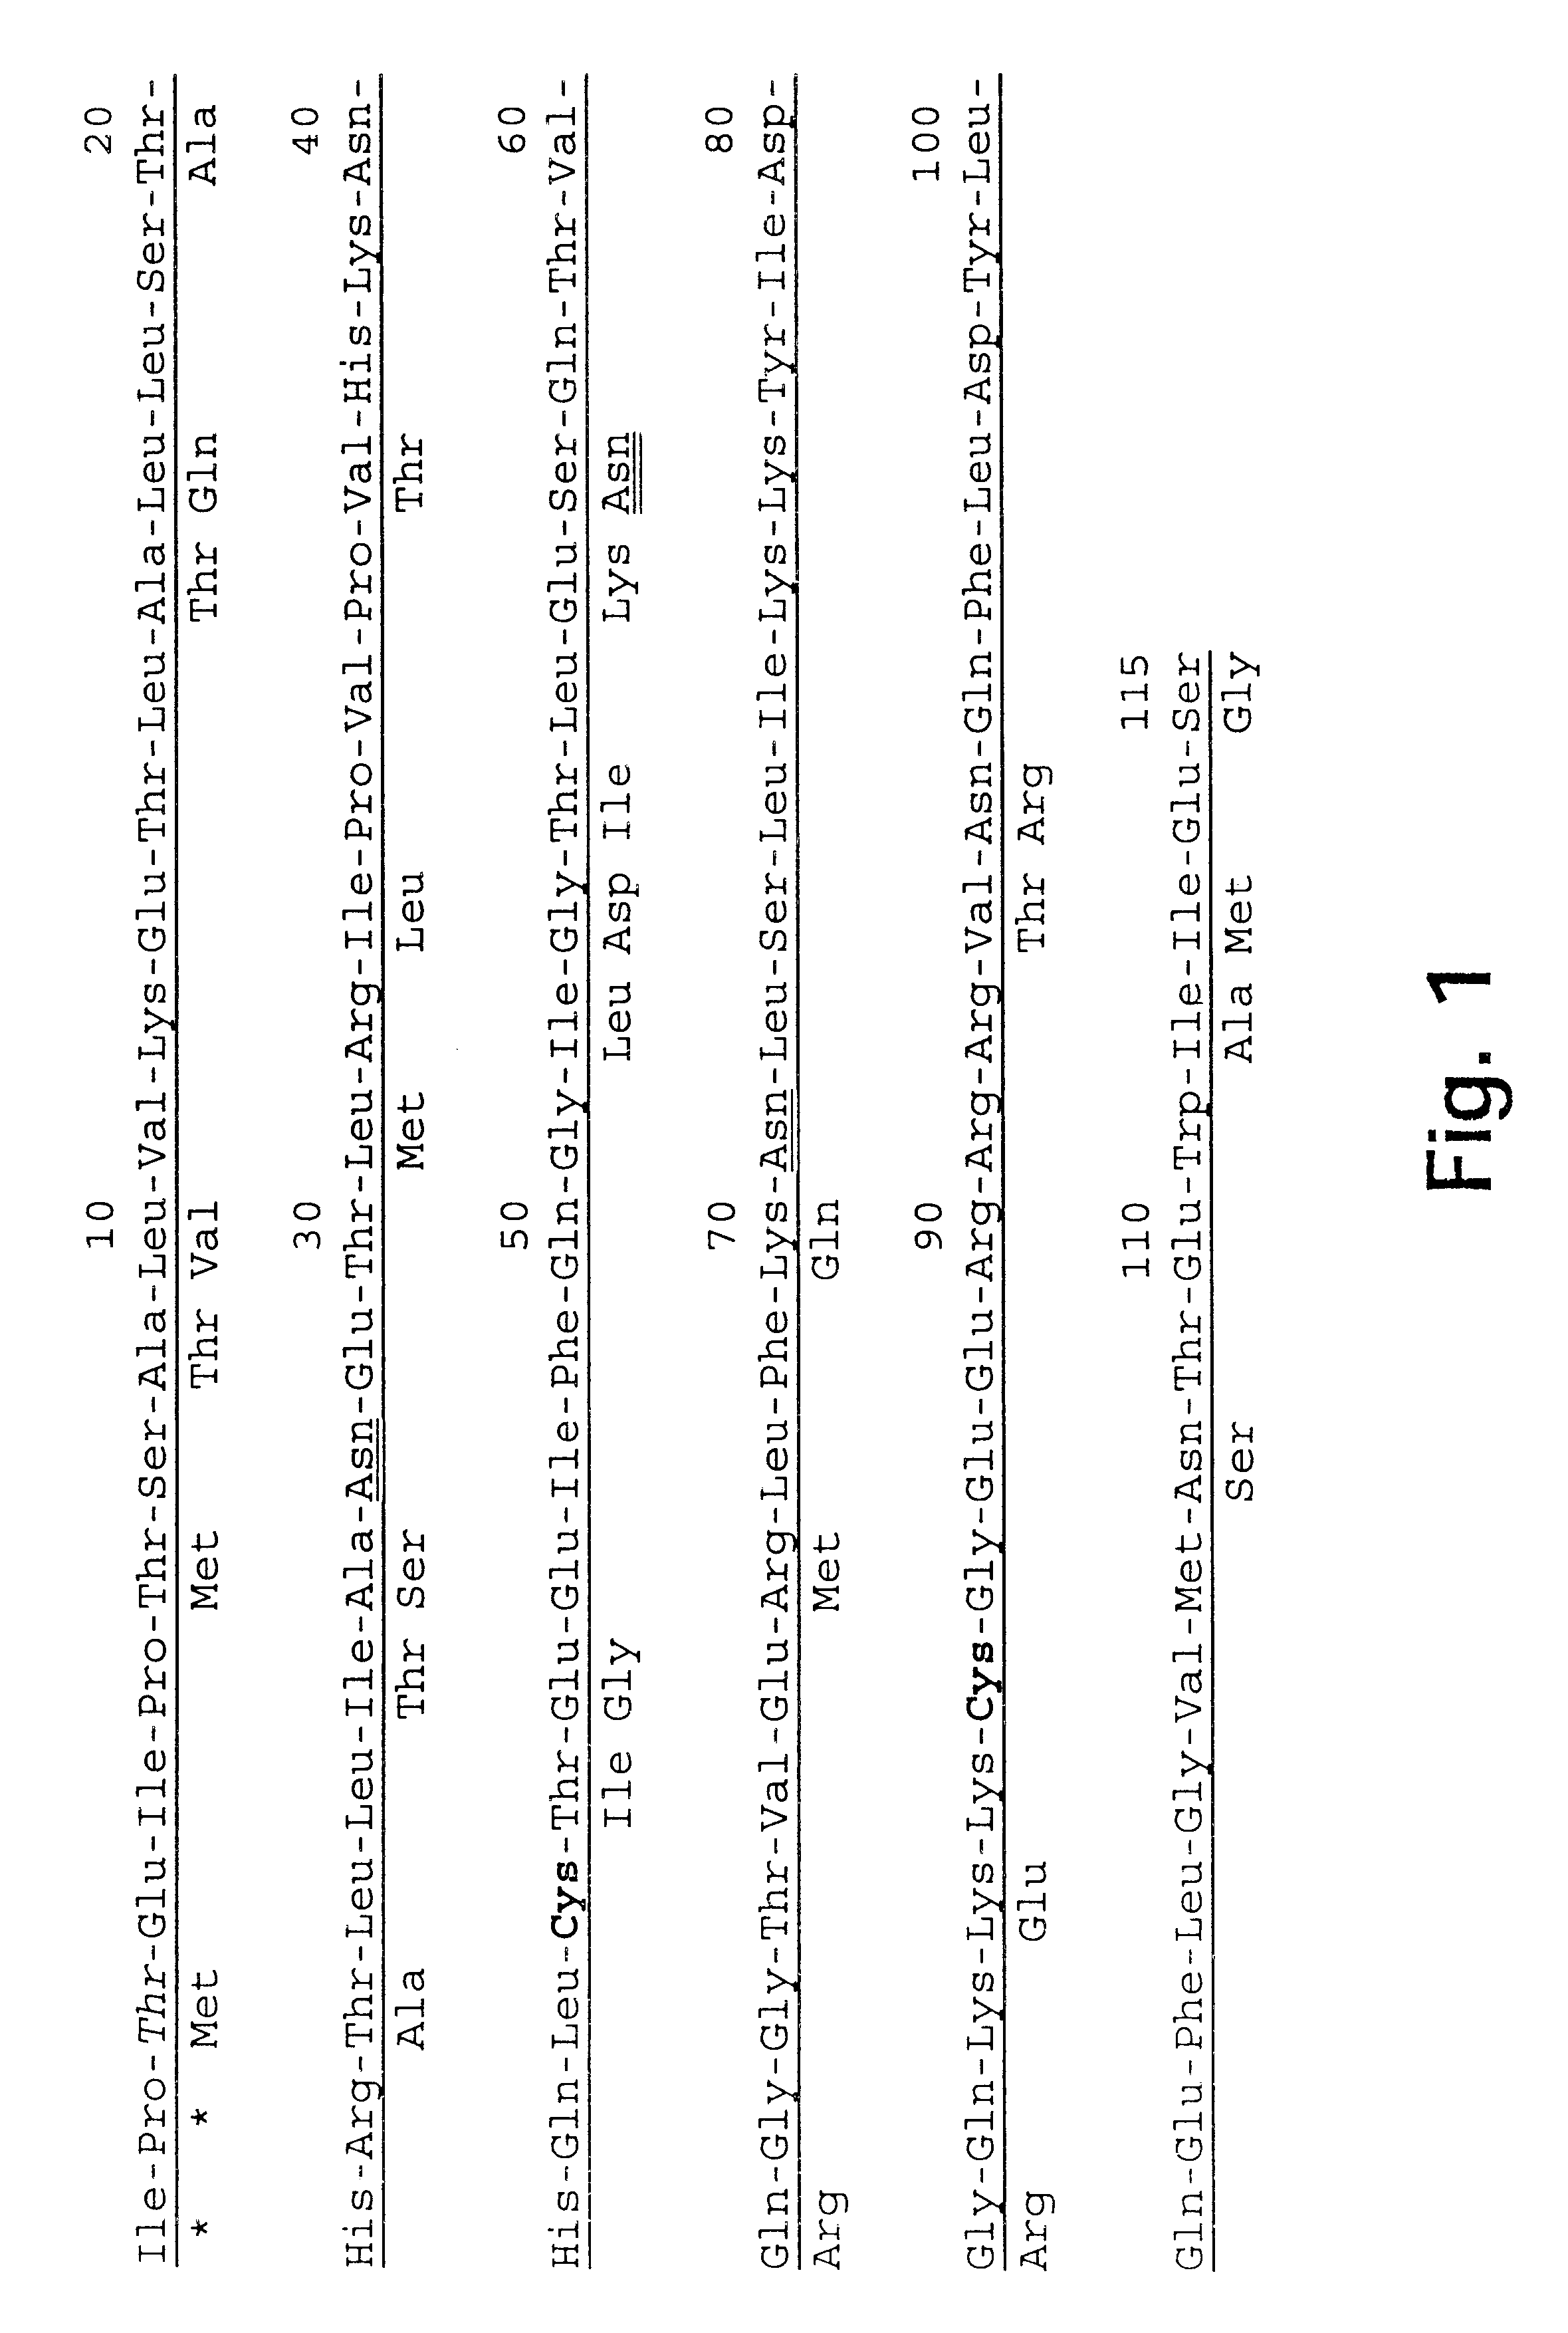 Method for down-regulating IL5 activity